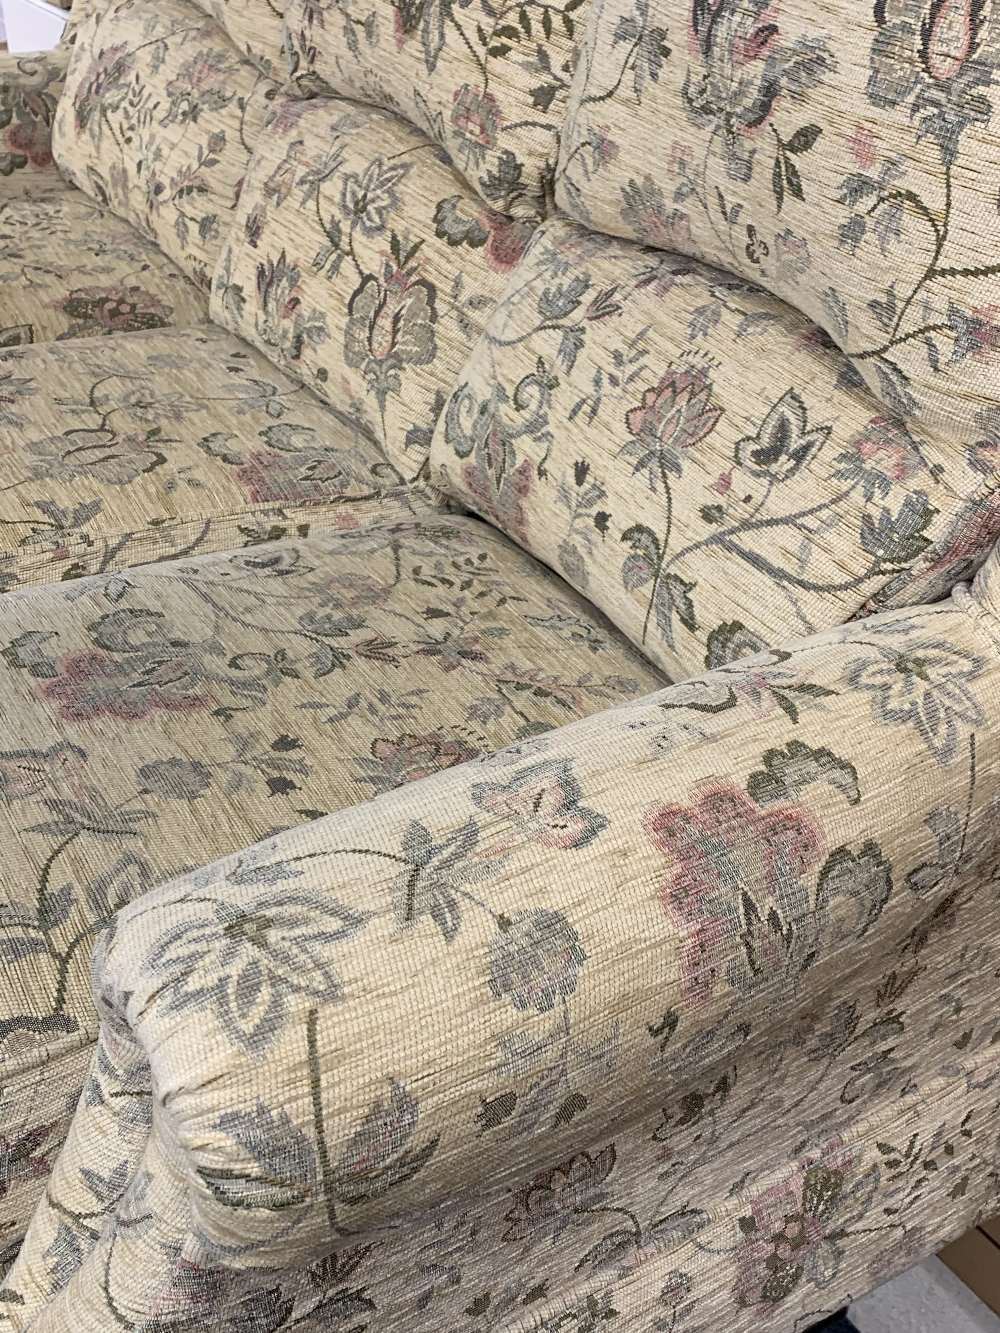 RUTLAND THREE SEATER SOFA in natural floral pattern, 102cms H, 180cms W, 90cms D overall - Image 2 of 4